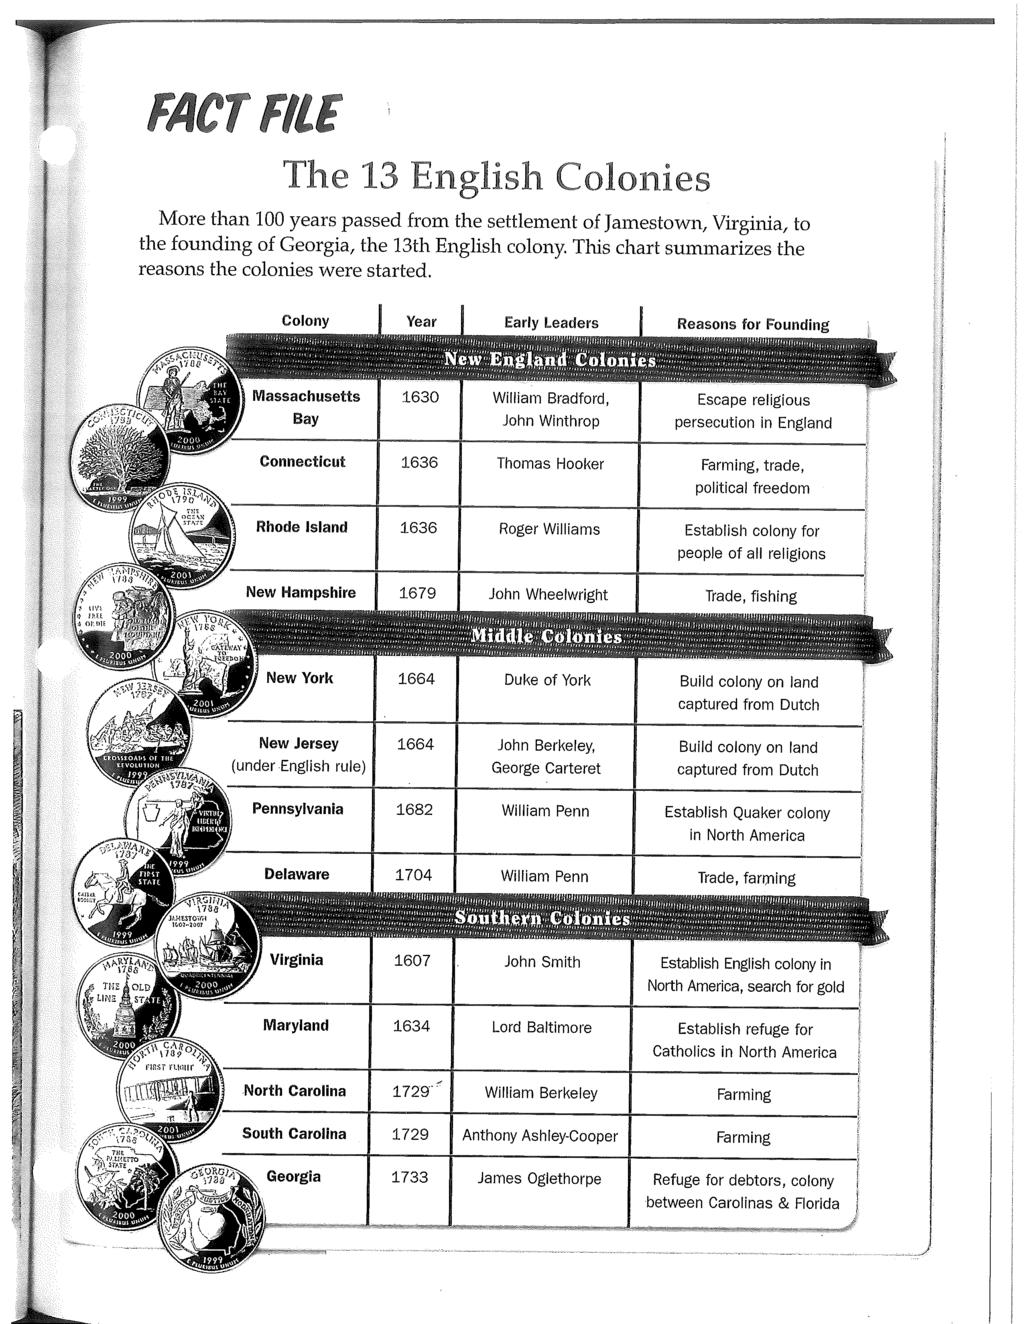 fact me The 13 English Colonies More tha 100 years passed from the settlement of Jamestown, Virginia, to the foundin of Georgia, the 13th English colony.